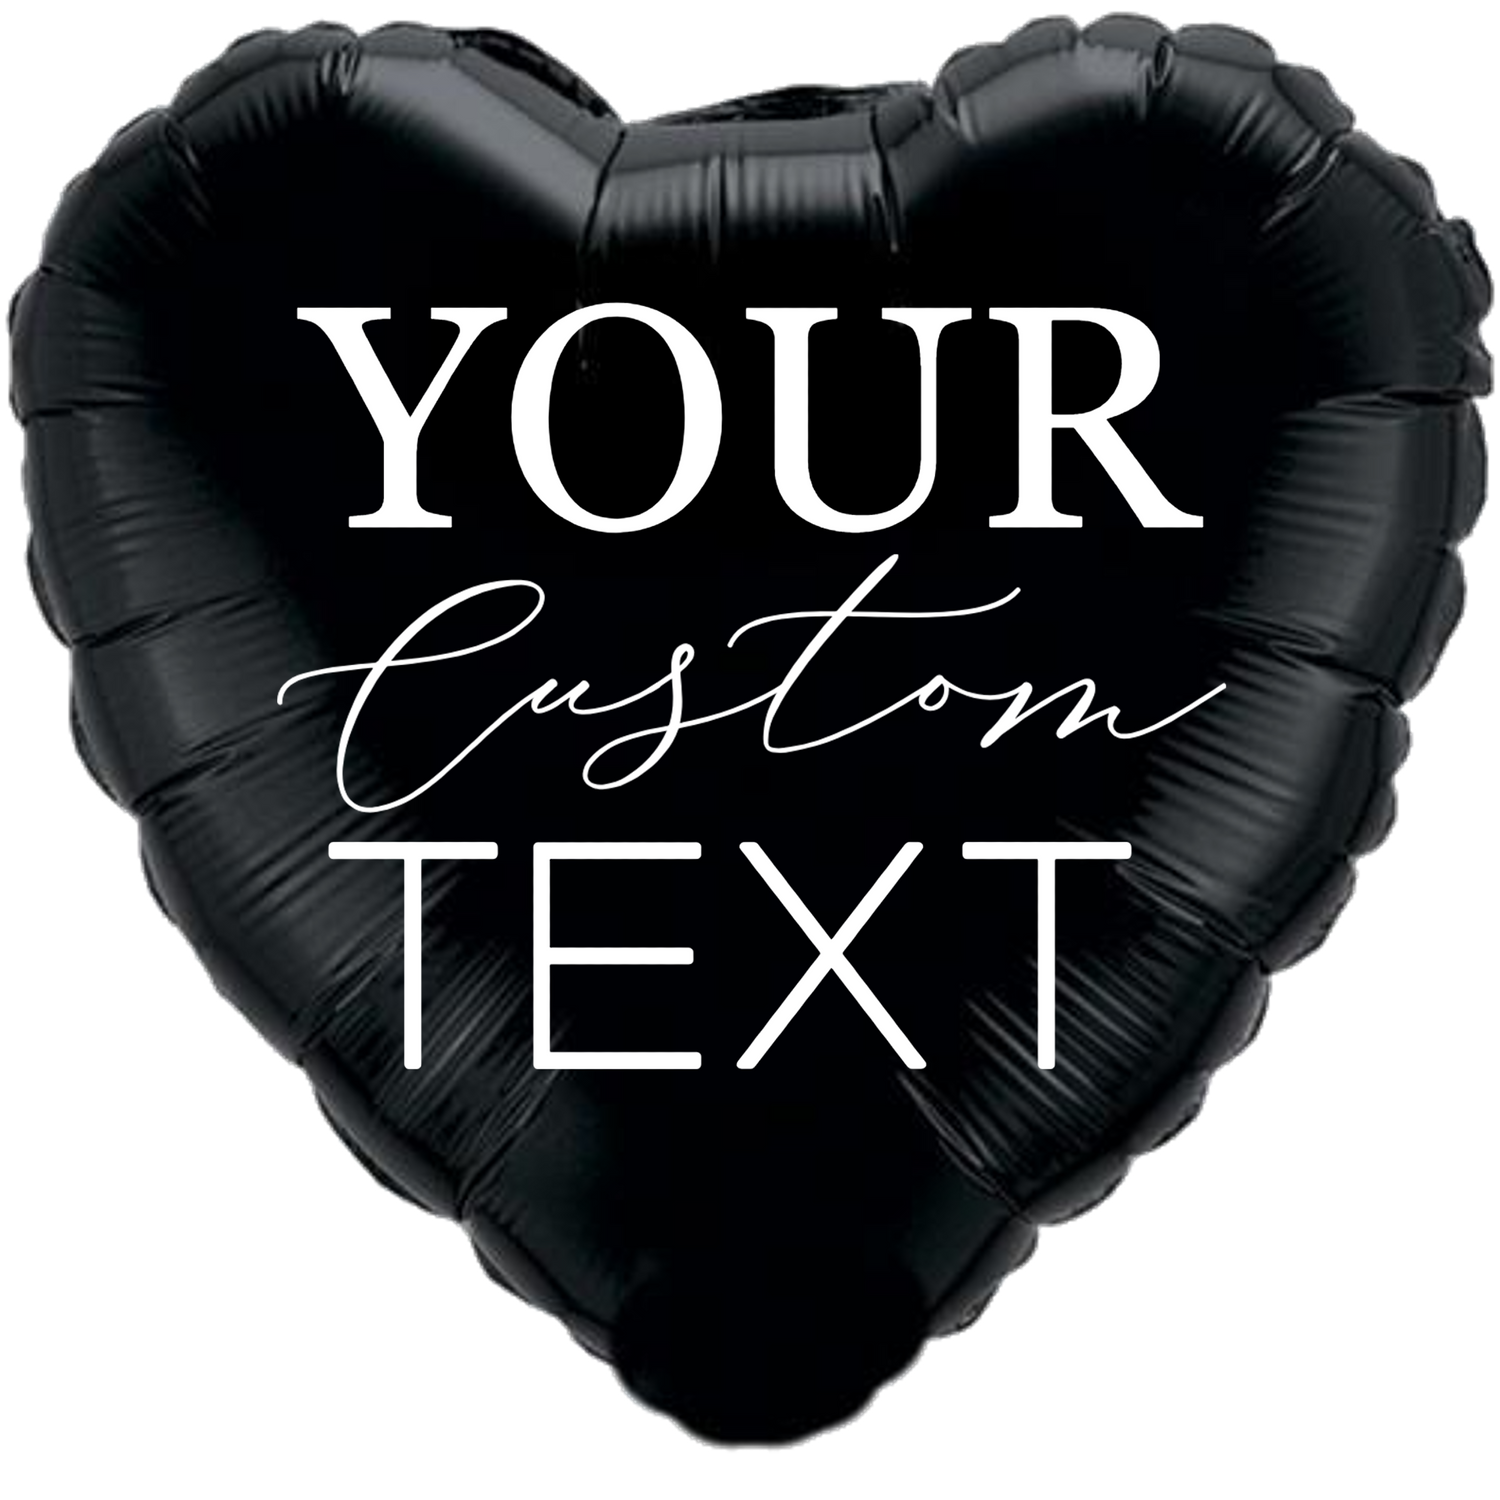 Custom Name/Text Foil/Mylar Black Heart Balloons For Birthday Parties, Wedding Anniversaries, Marriage Proposals, Baby Shower, Baby Welcoming, Graduation Ceremony, Bachelorette Parties, Bridal Shower, Festivals, Occasions and Corporate Events. Supports Helium/Air, Luxury Bespoke Balloons Are a Perfect Surprise For Your Baby, Wife, Mom, Dad.